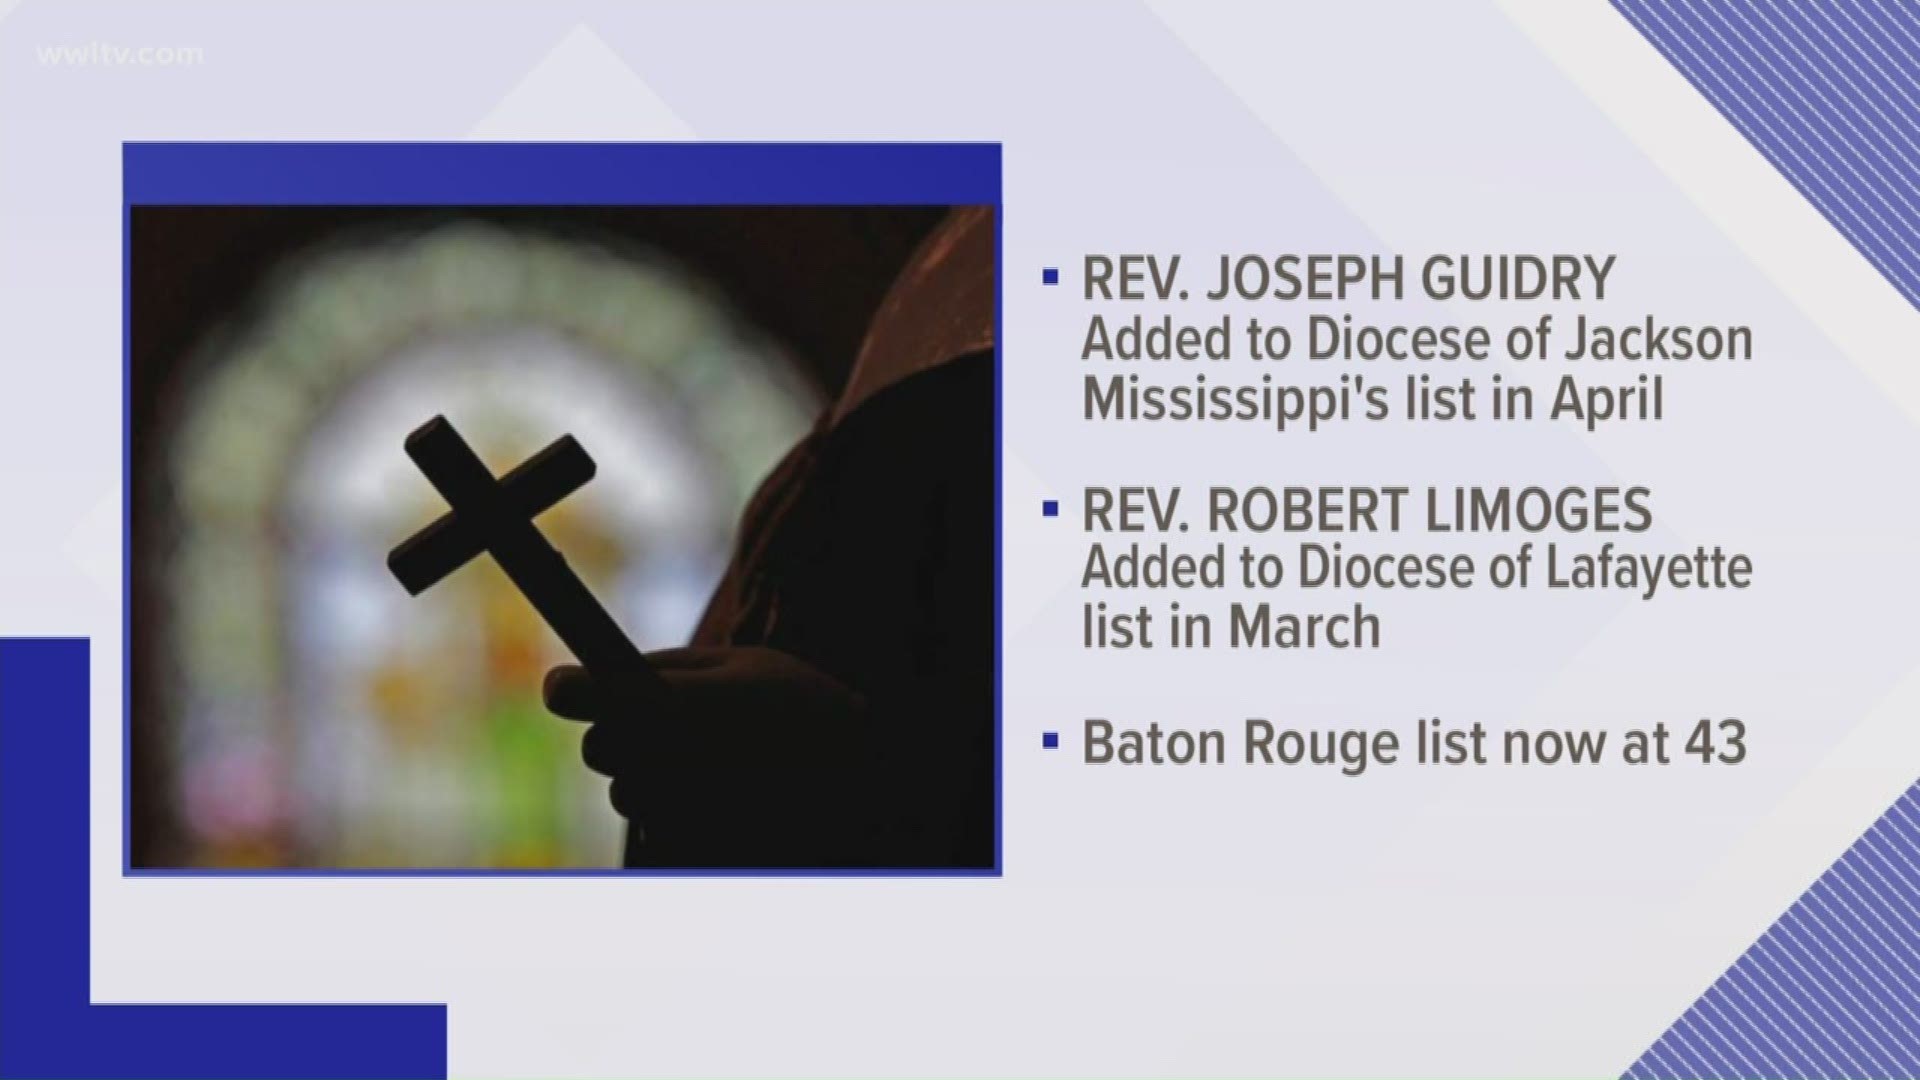 The Diocese of Baton Rouge has added two more names to its list of Catholic clerics who have been credibly accused of sexual abuse.